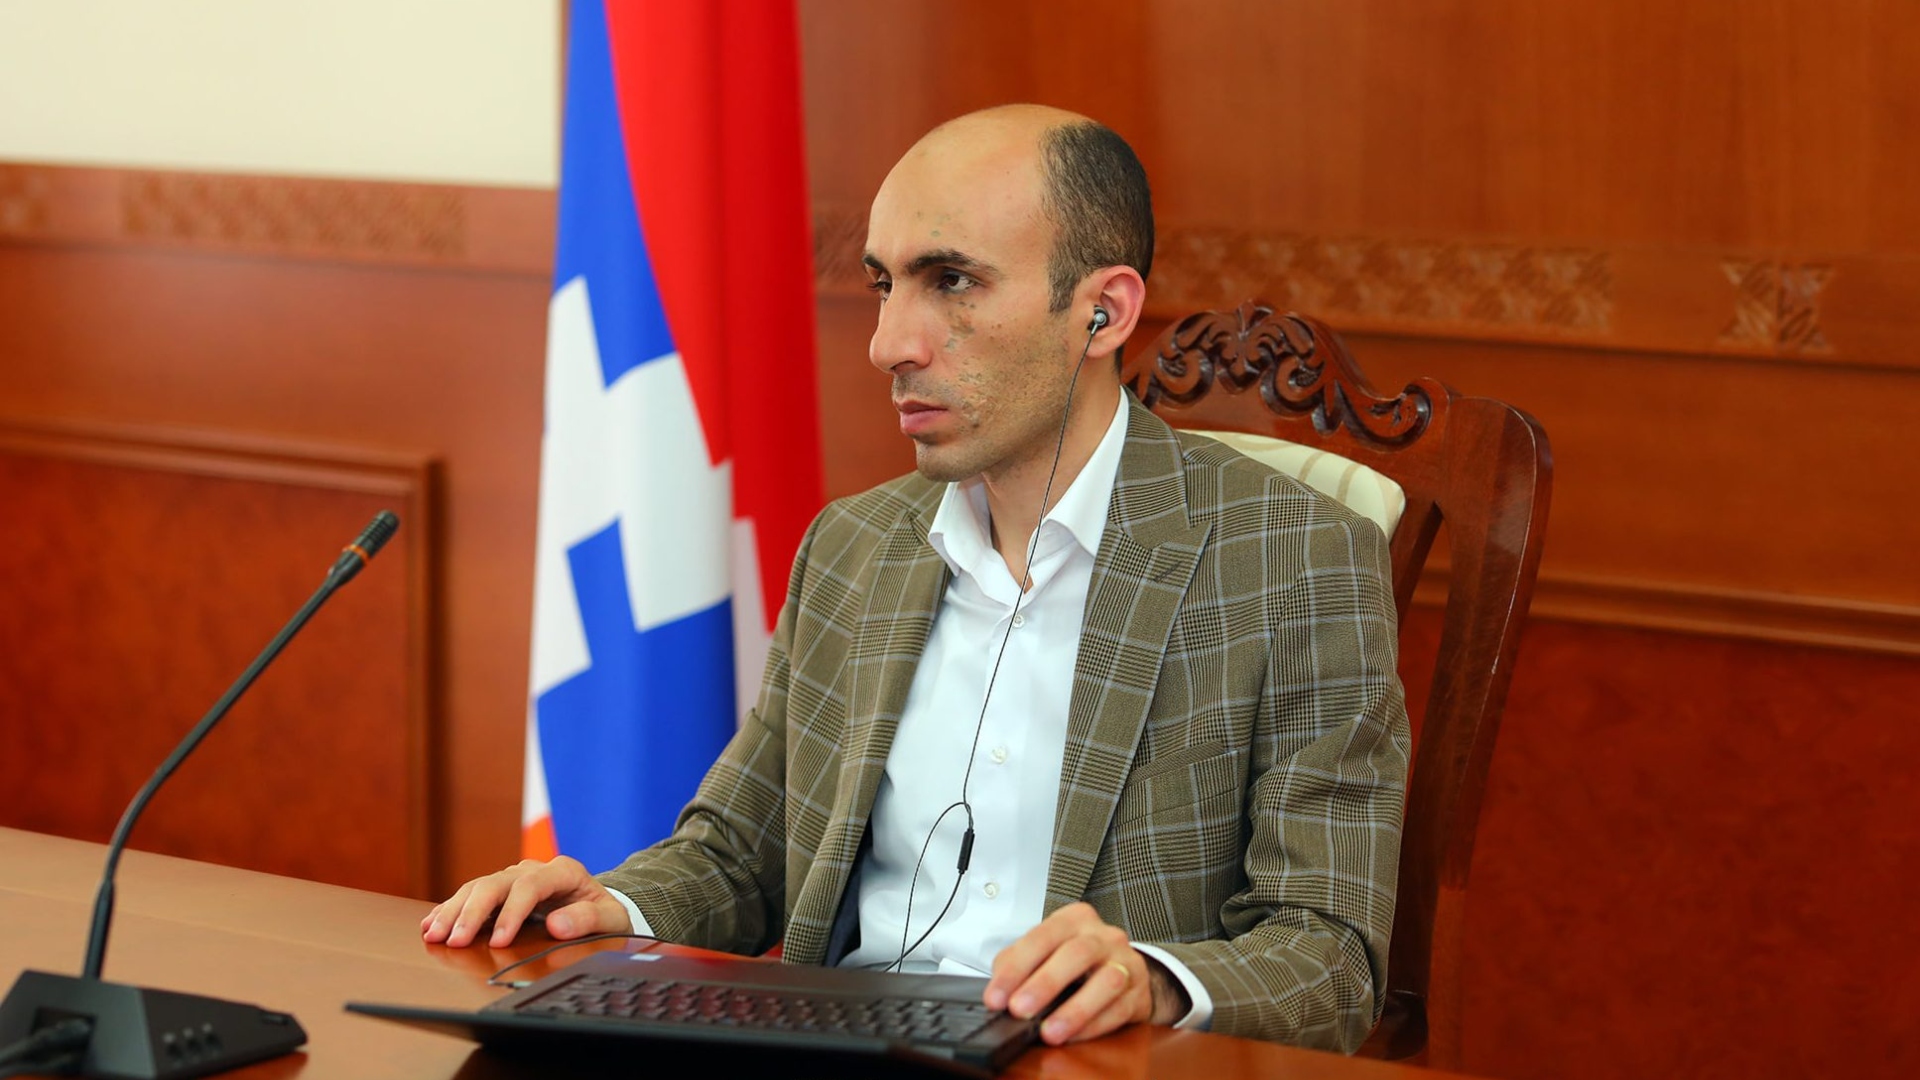 Senior Karabakh official stresses importance of international recognition, Russian peacekeepers